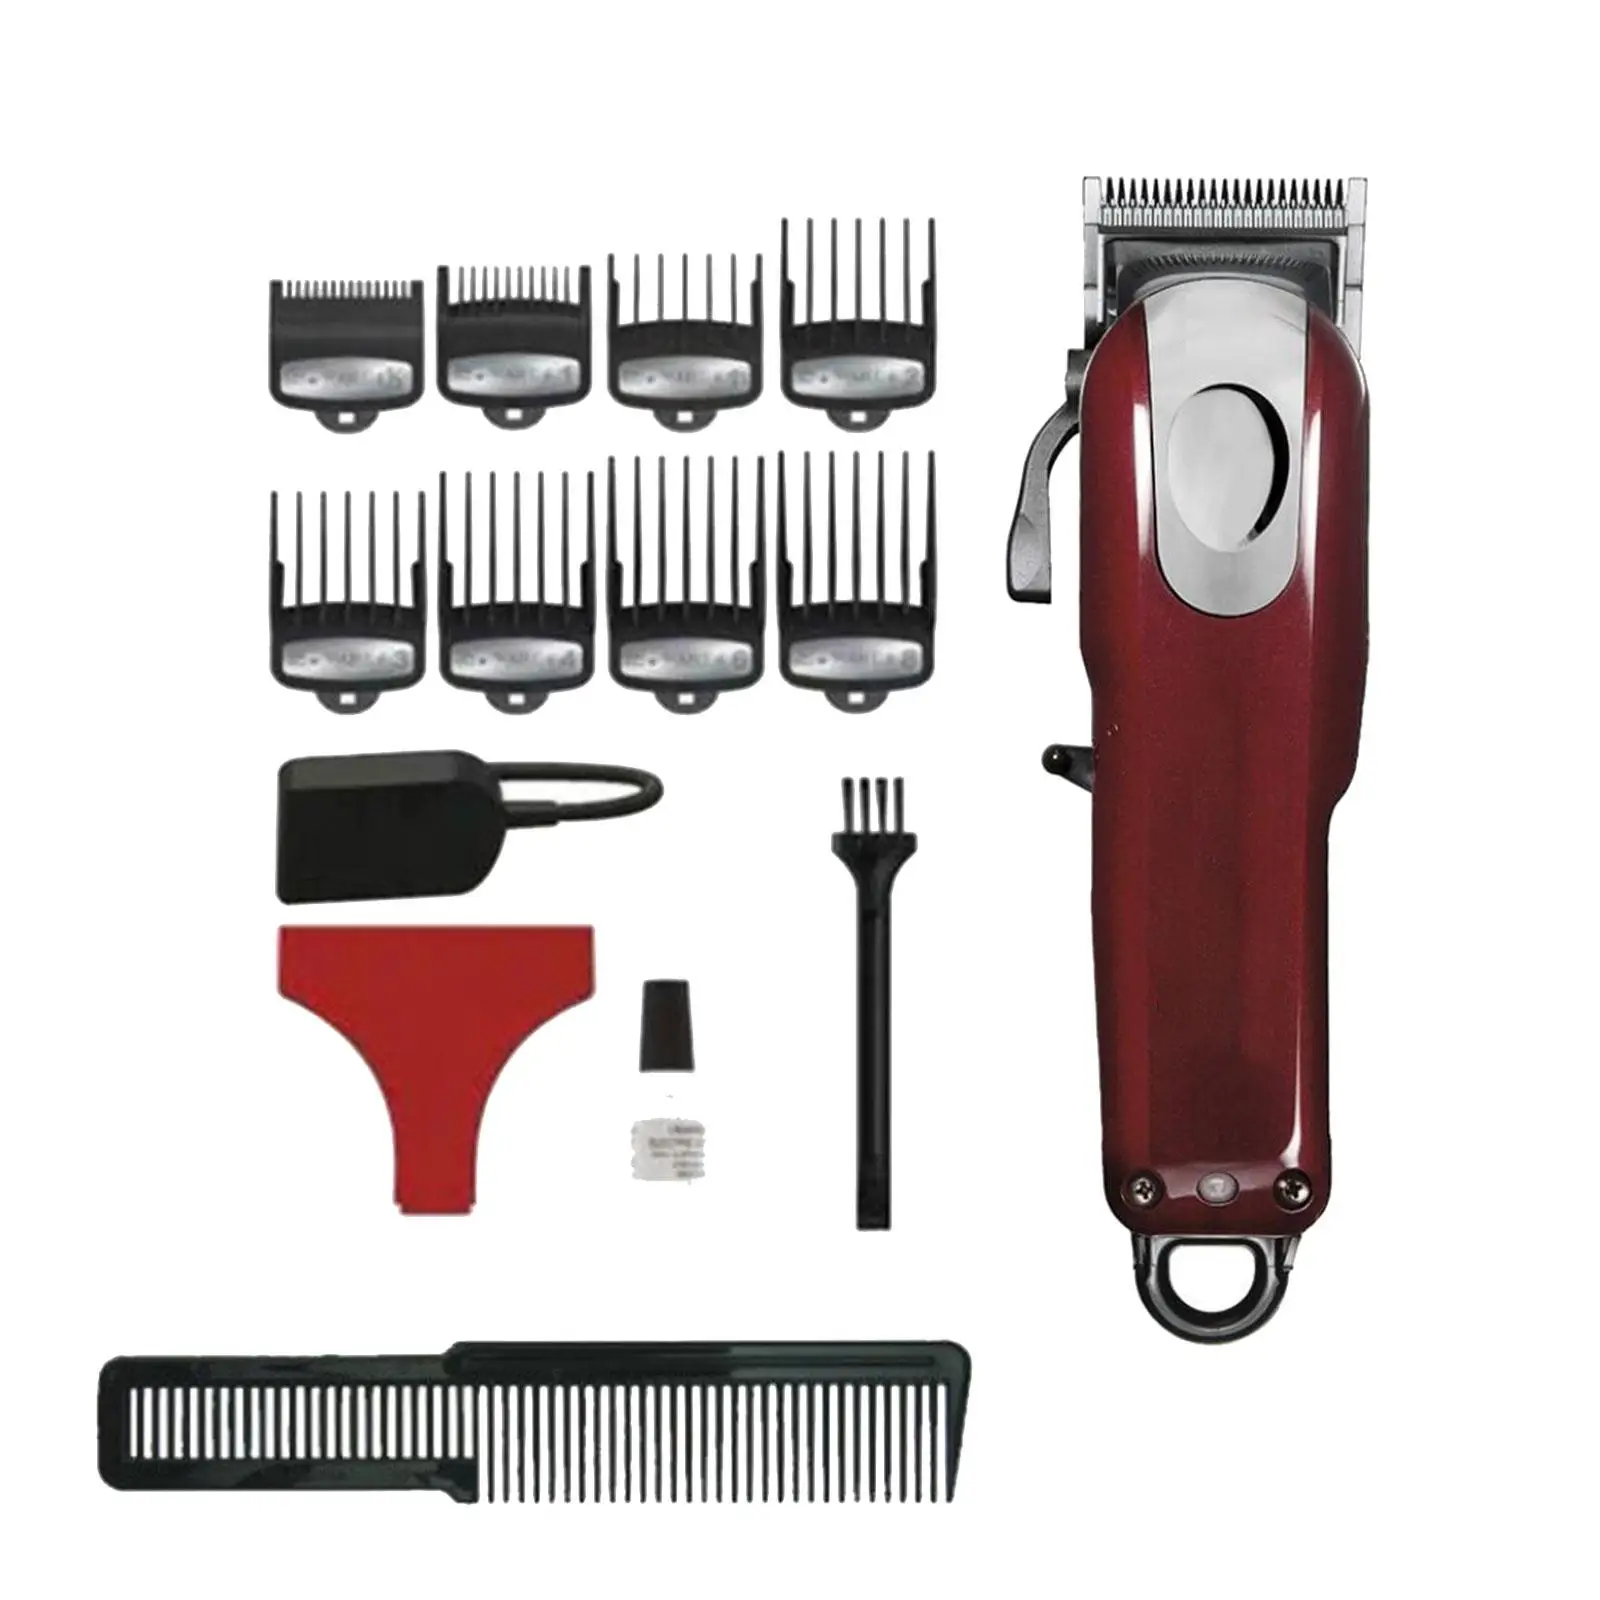 Electric Hair Clipper 8148 EU Power Adapter with Oil, Cutting Guides, Styling Comb for Stylists Professional Cordless Use